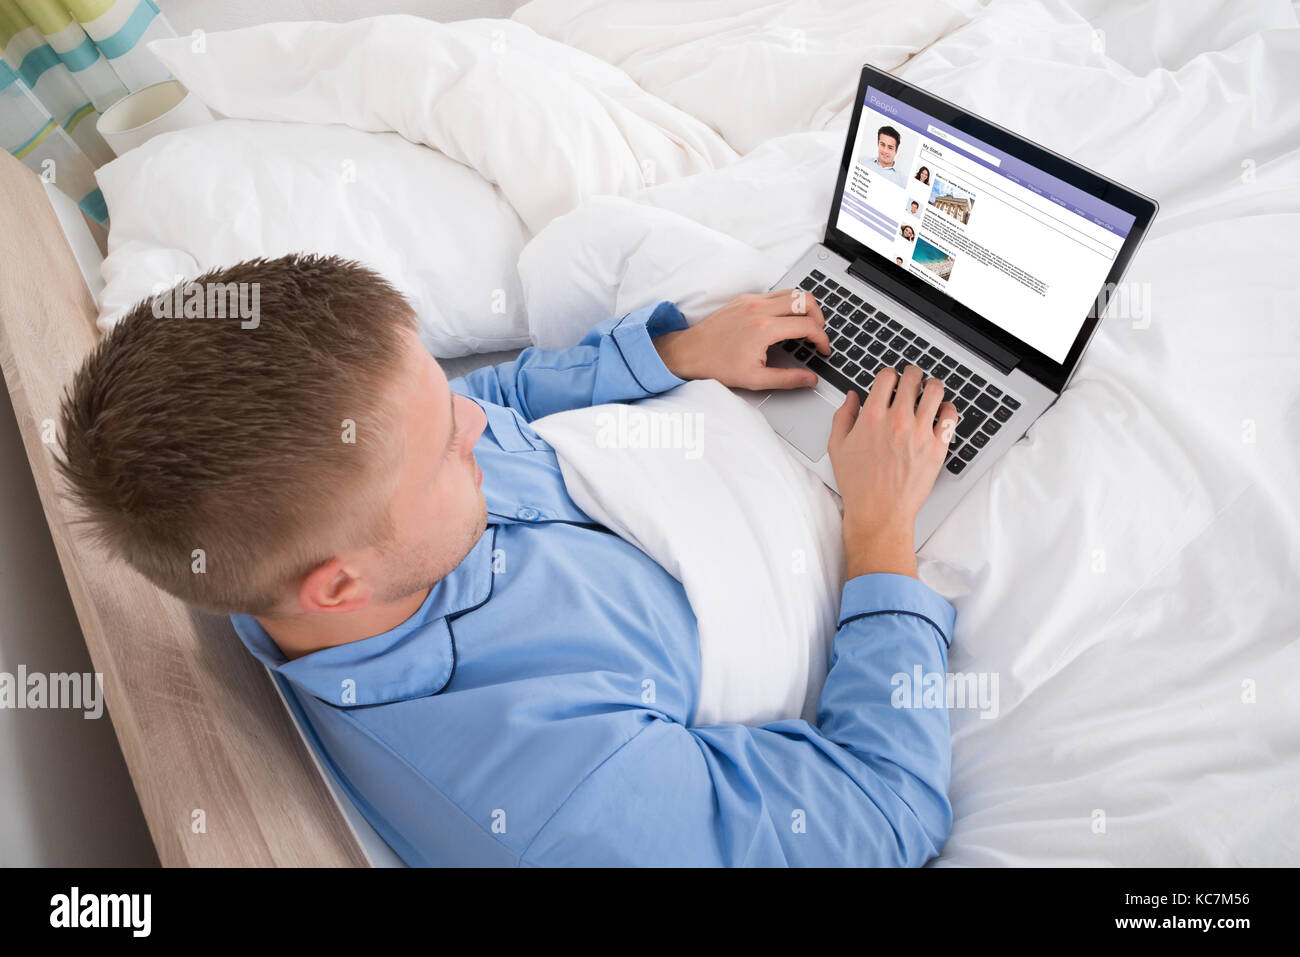 Young Man Chatting On Social Networking Site Using Laptop Stock Photo